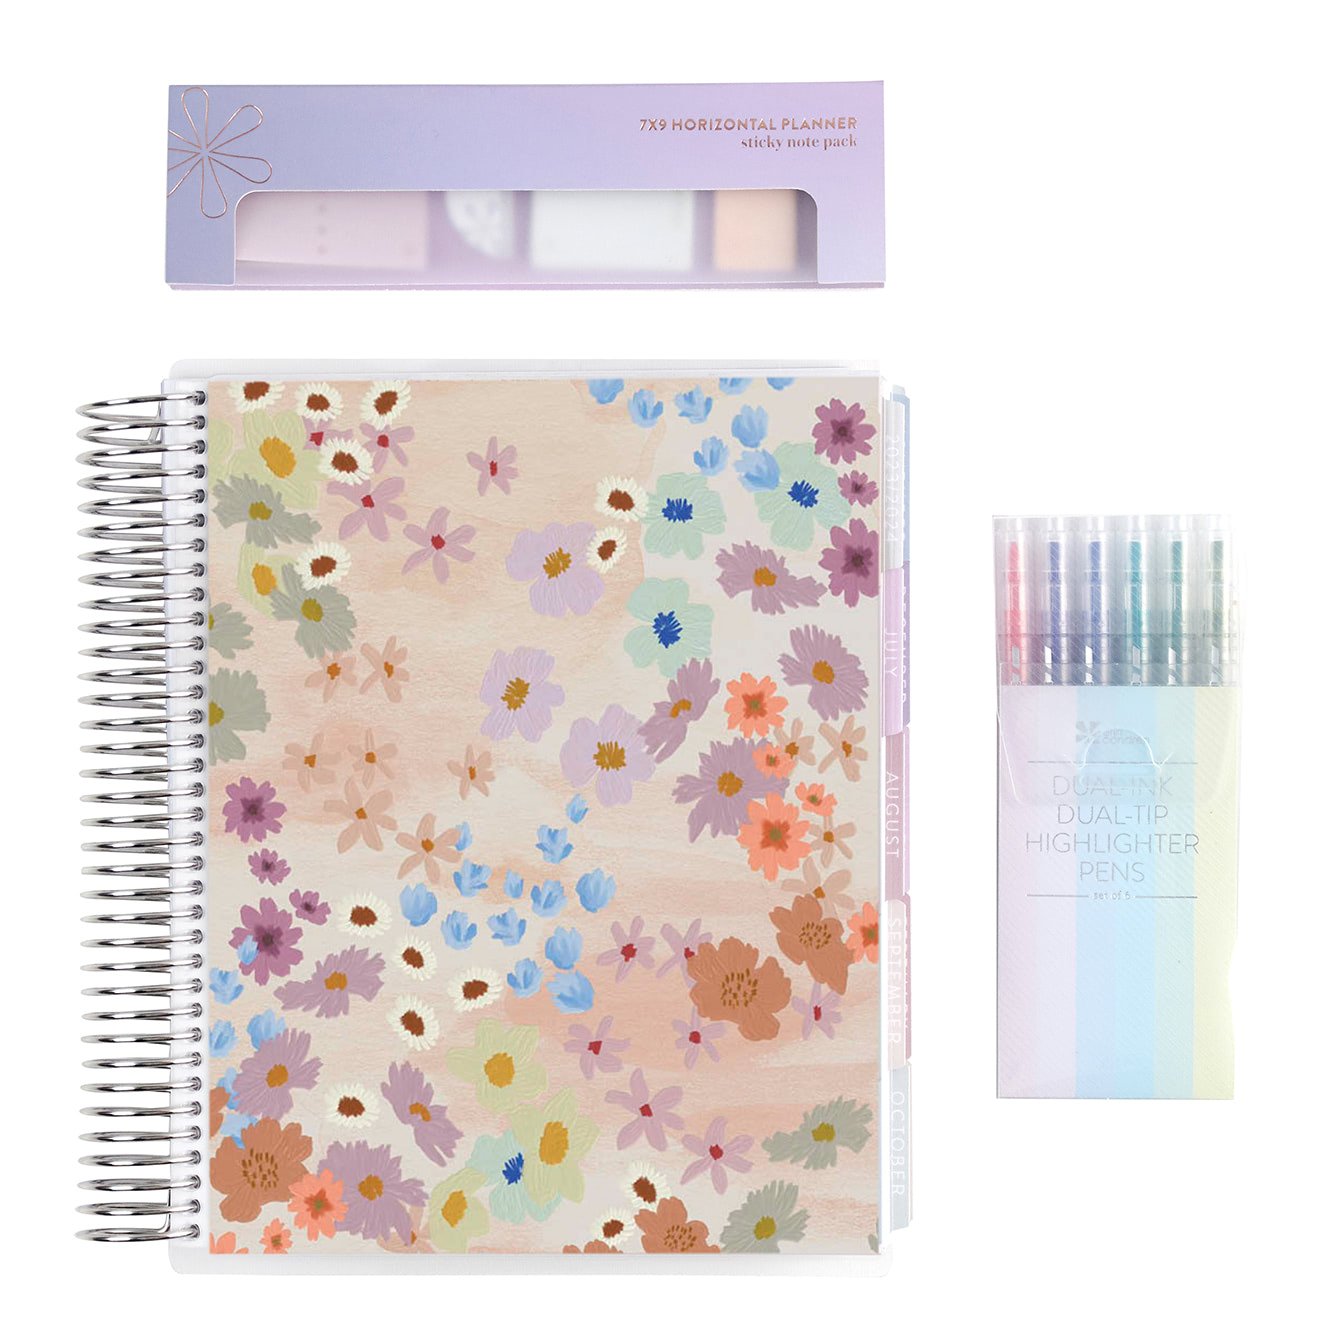 The Accessories BUNDLE - Pens & Highlighters – The Daily Grind Planner